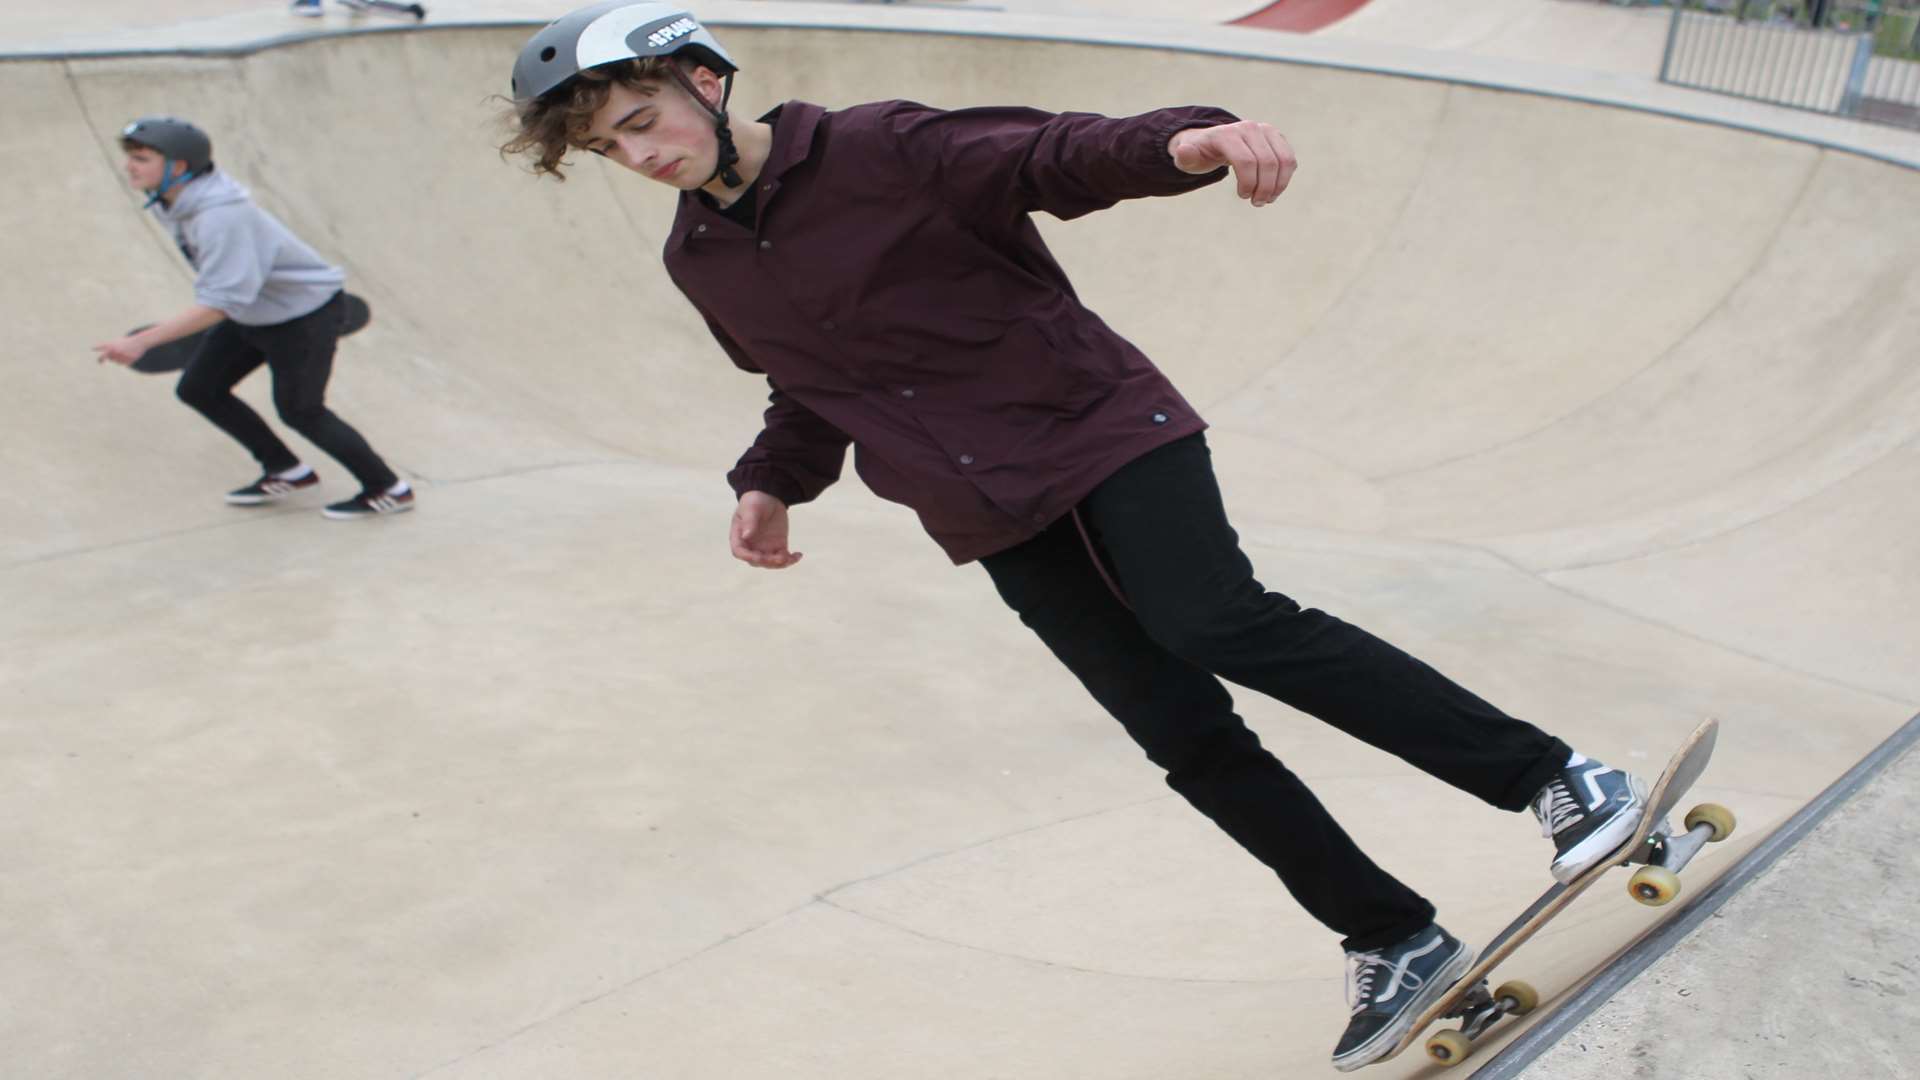 Sittingbourne skaters will soon be able to skate closer to home